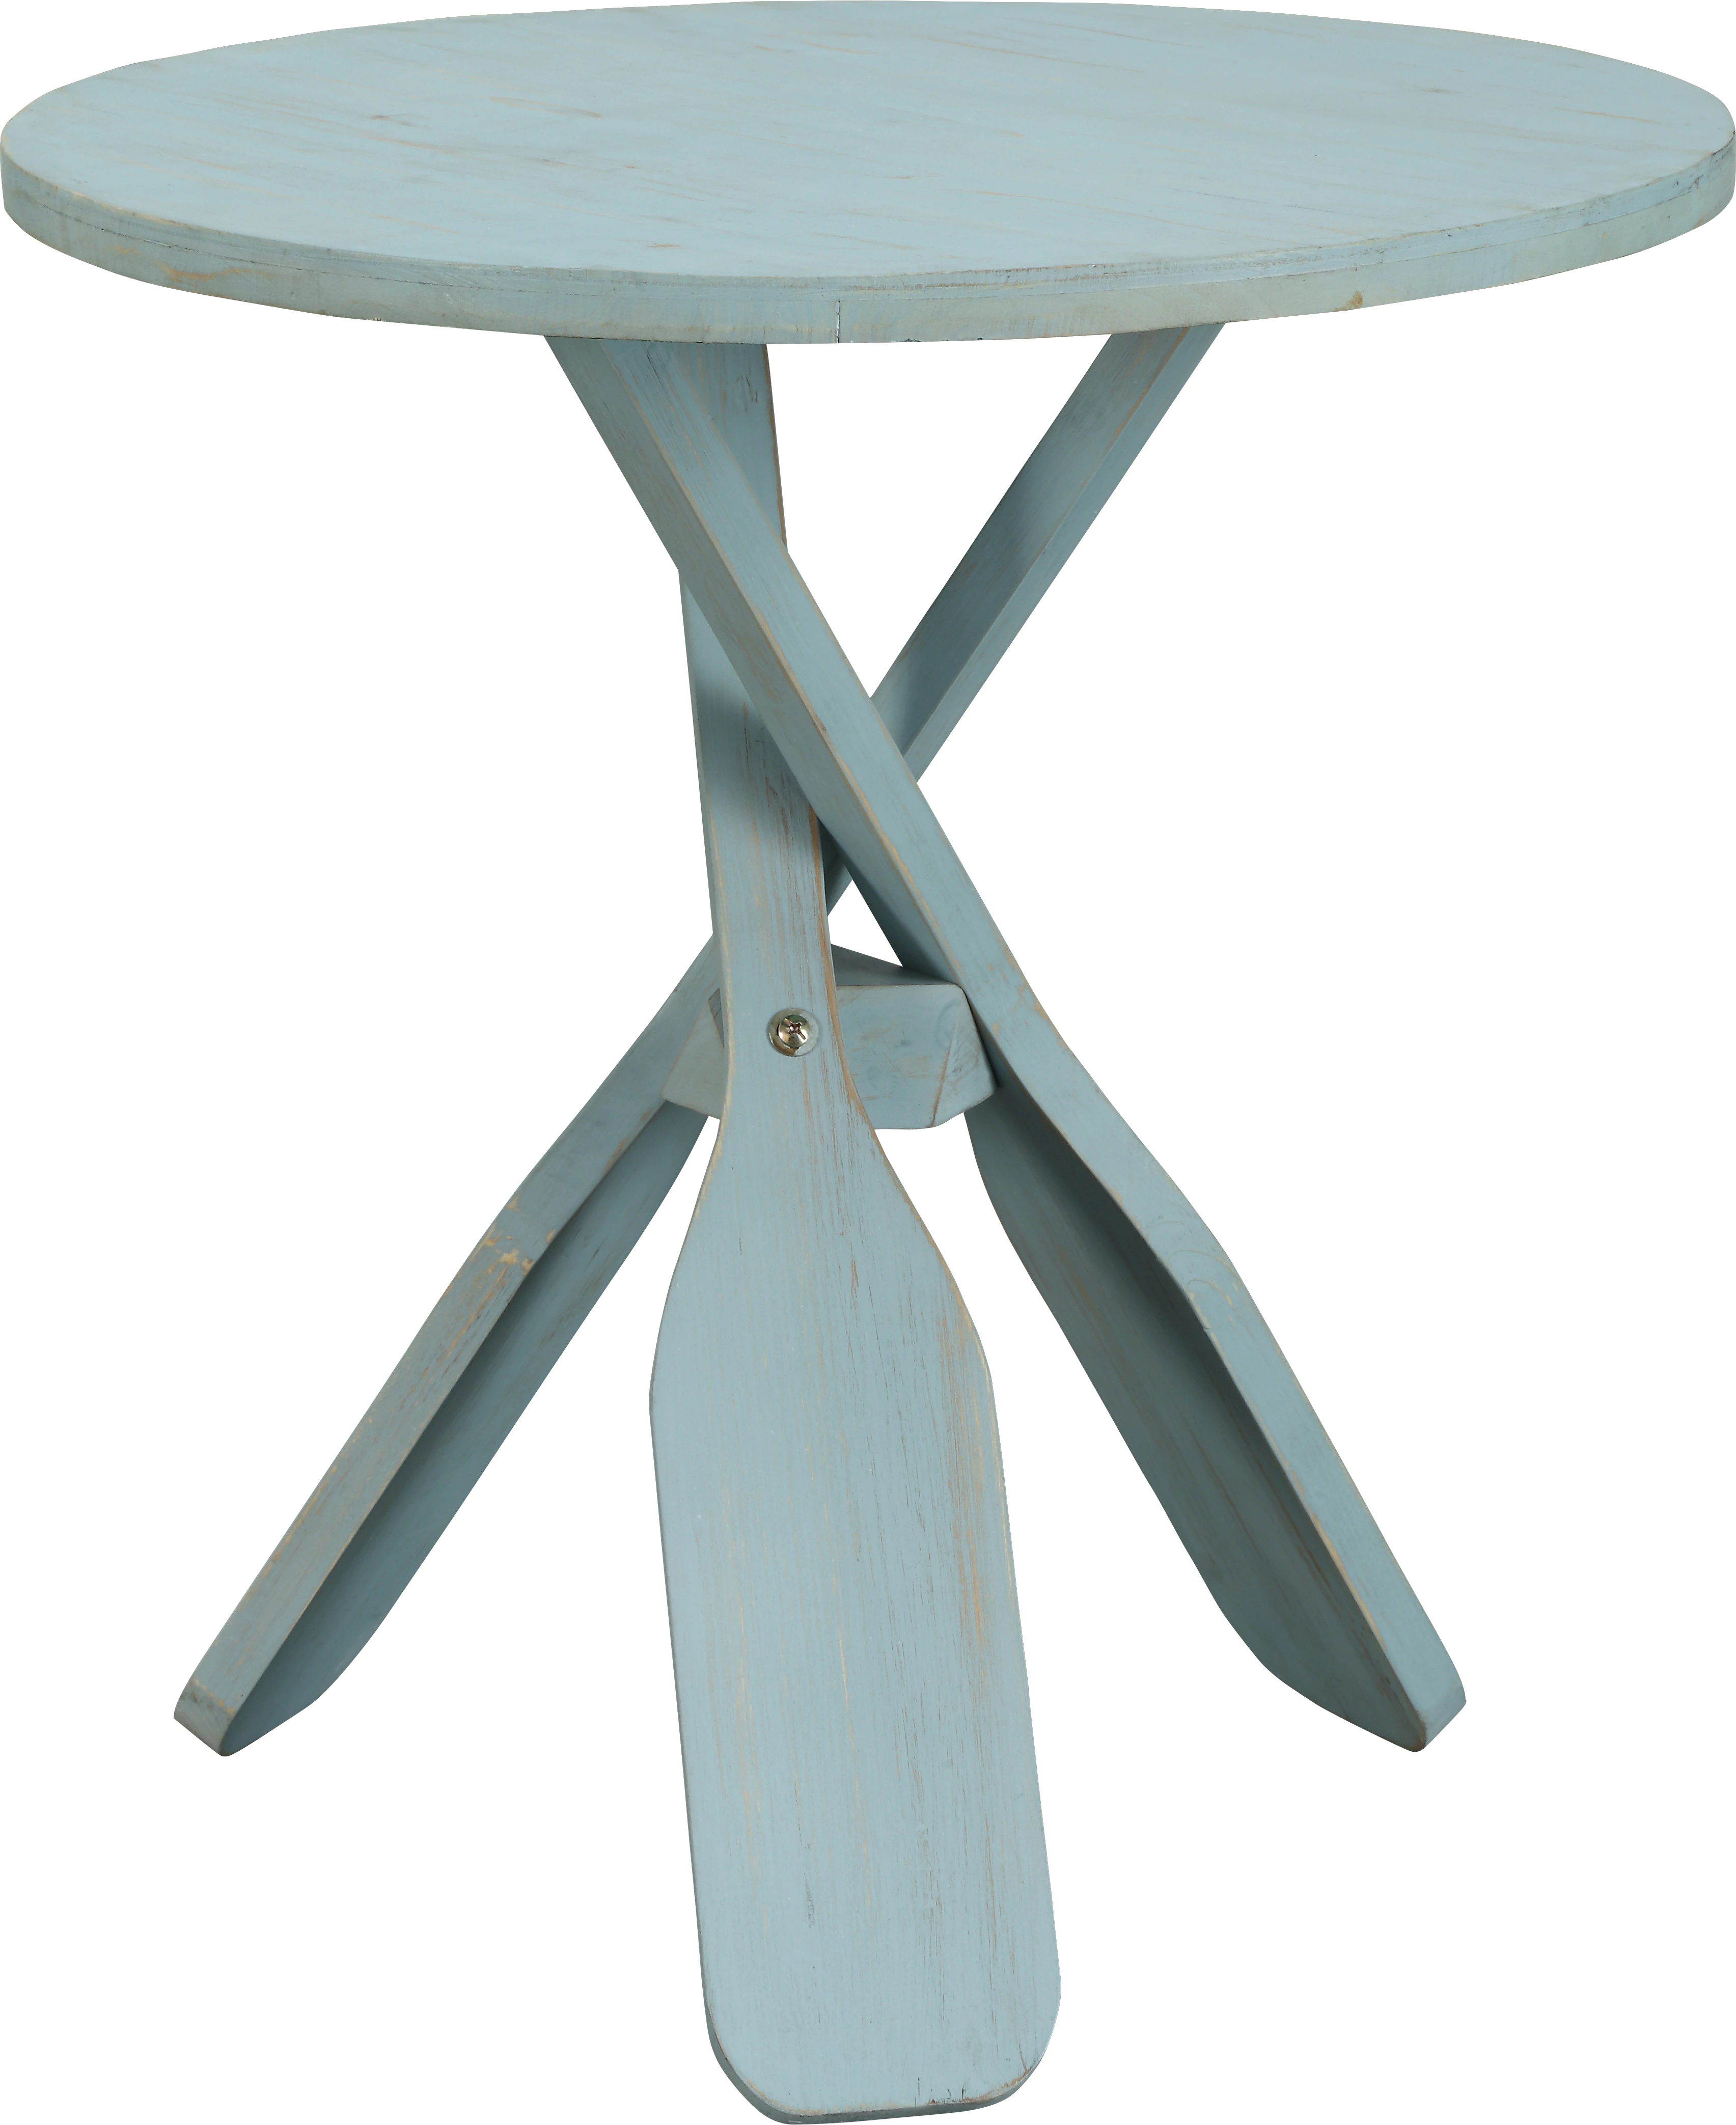 triple paddle blue accent table tables colors triplepaddle outdoor patio sofa porcelain lamp round entryway mid century modern and chairs mirror design ellipsis piece nesting set